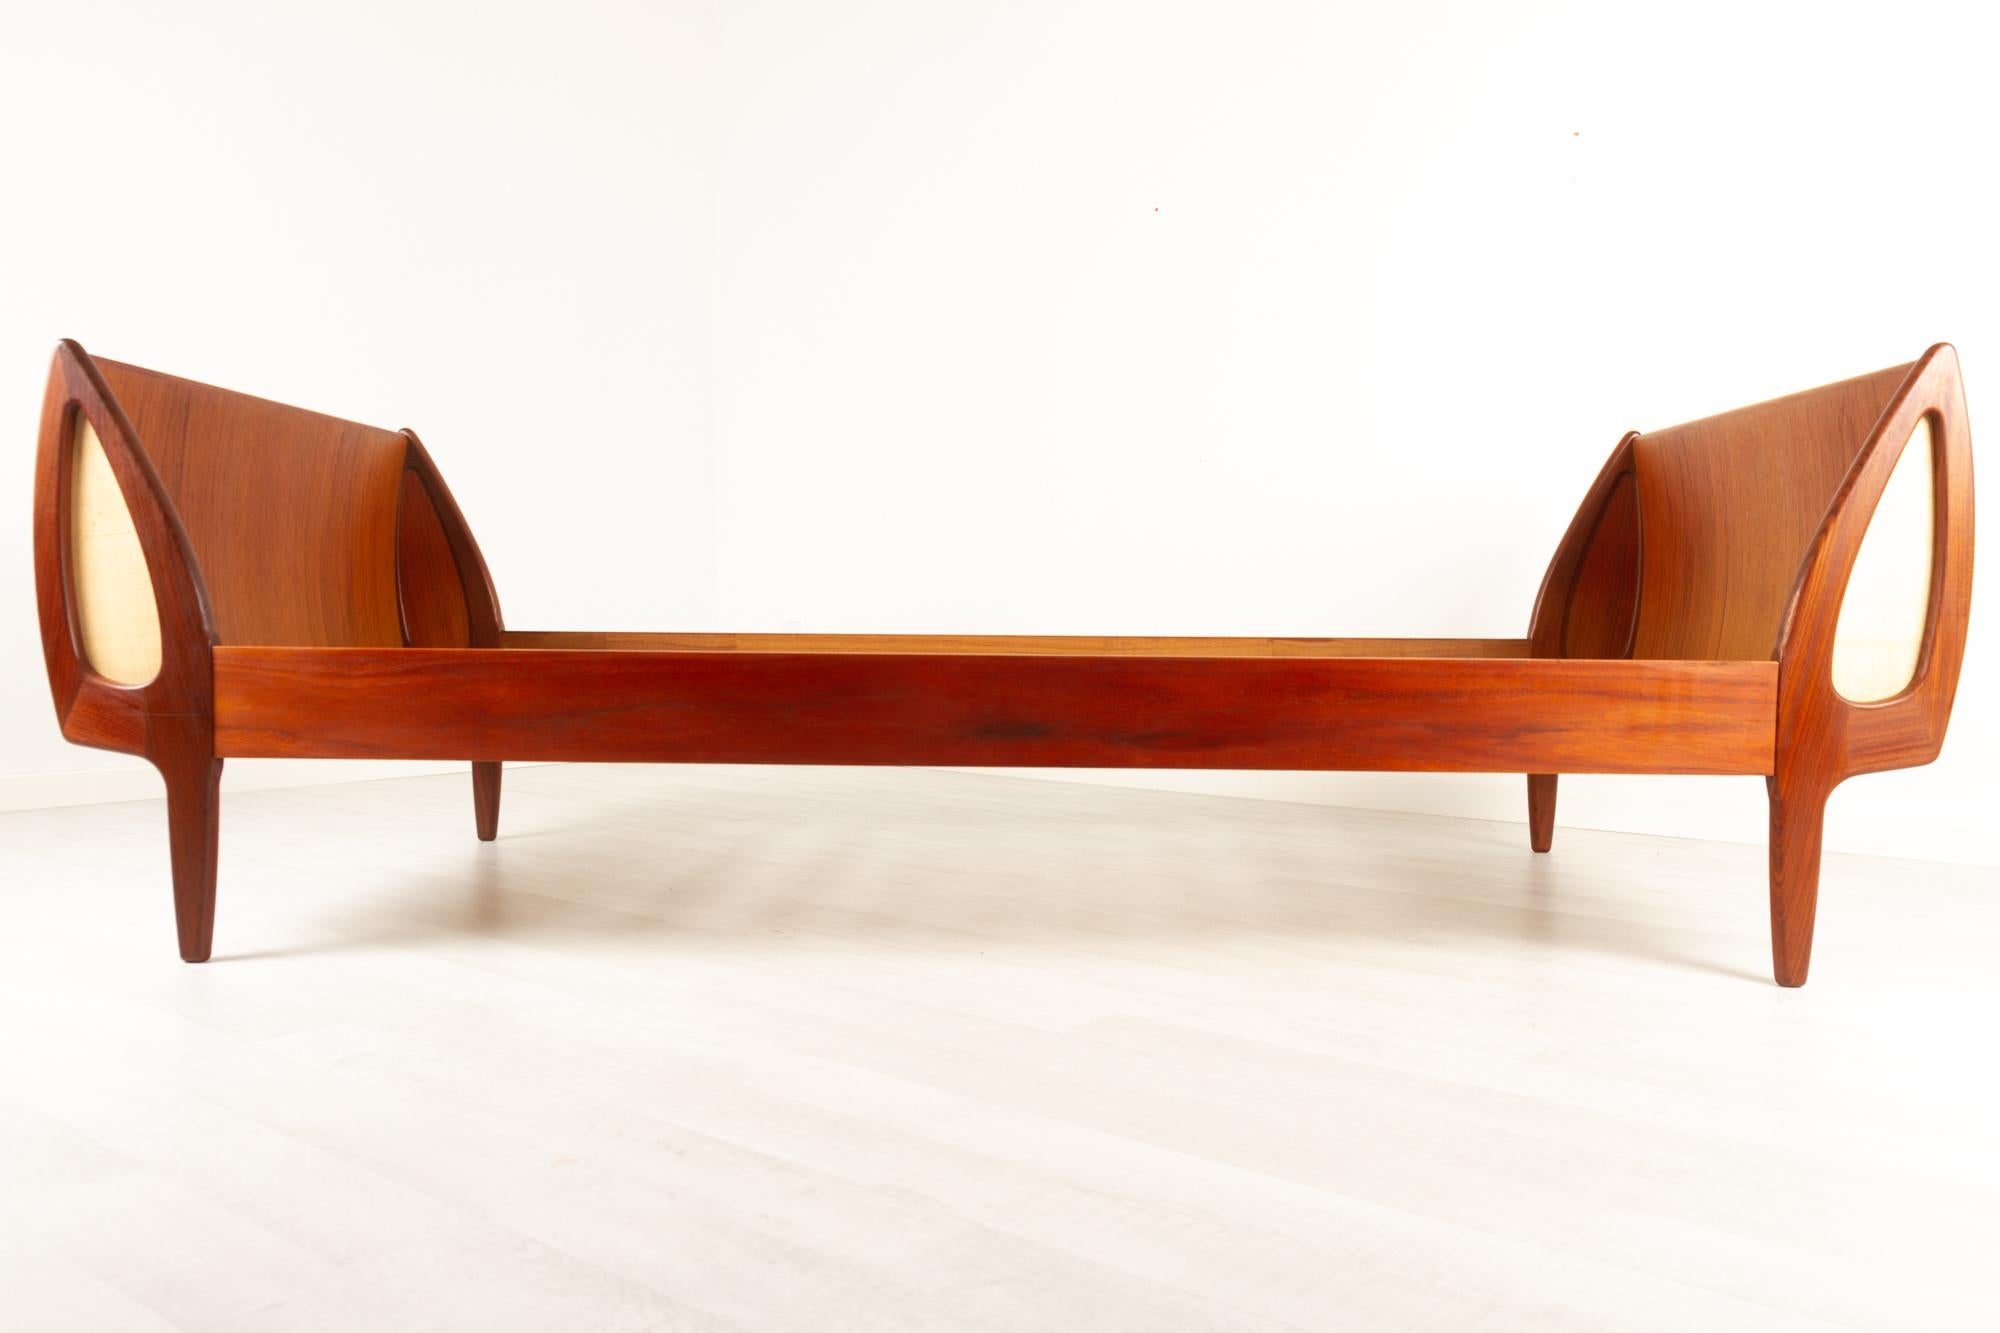 Vintage Danish teak daybed by Sigfred Omann for Ølholm Møbelfabrik, 1960s
Mid-Century Modern sleigh bed in teak with identical curved head- and footboard. Sculptural and organically shaped legs in solid dark teak. Suitable as daybed, bed or sofa.